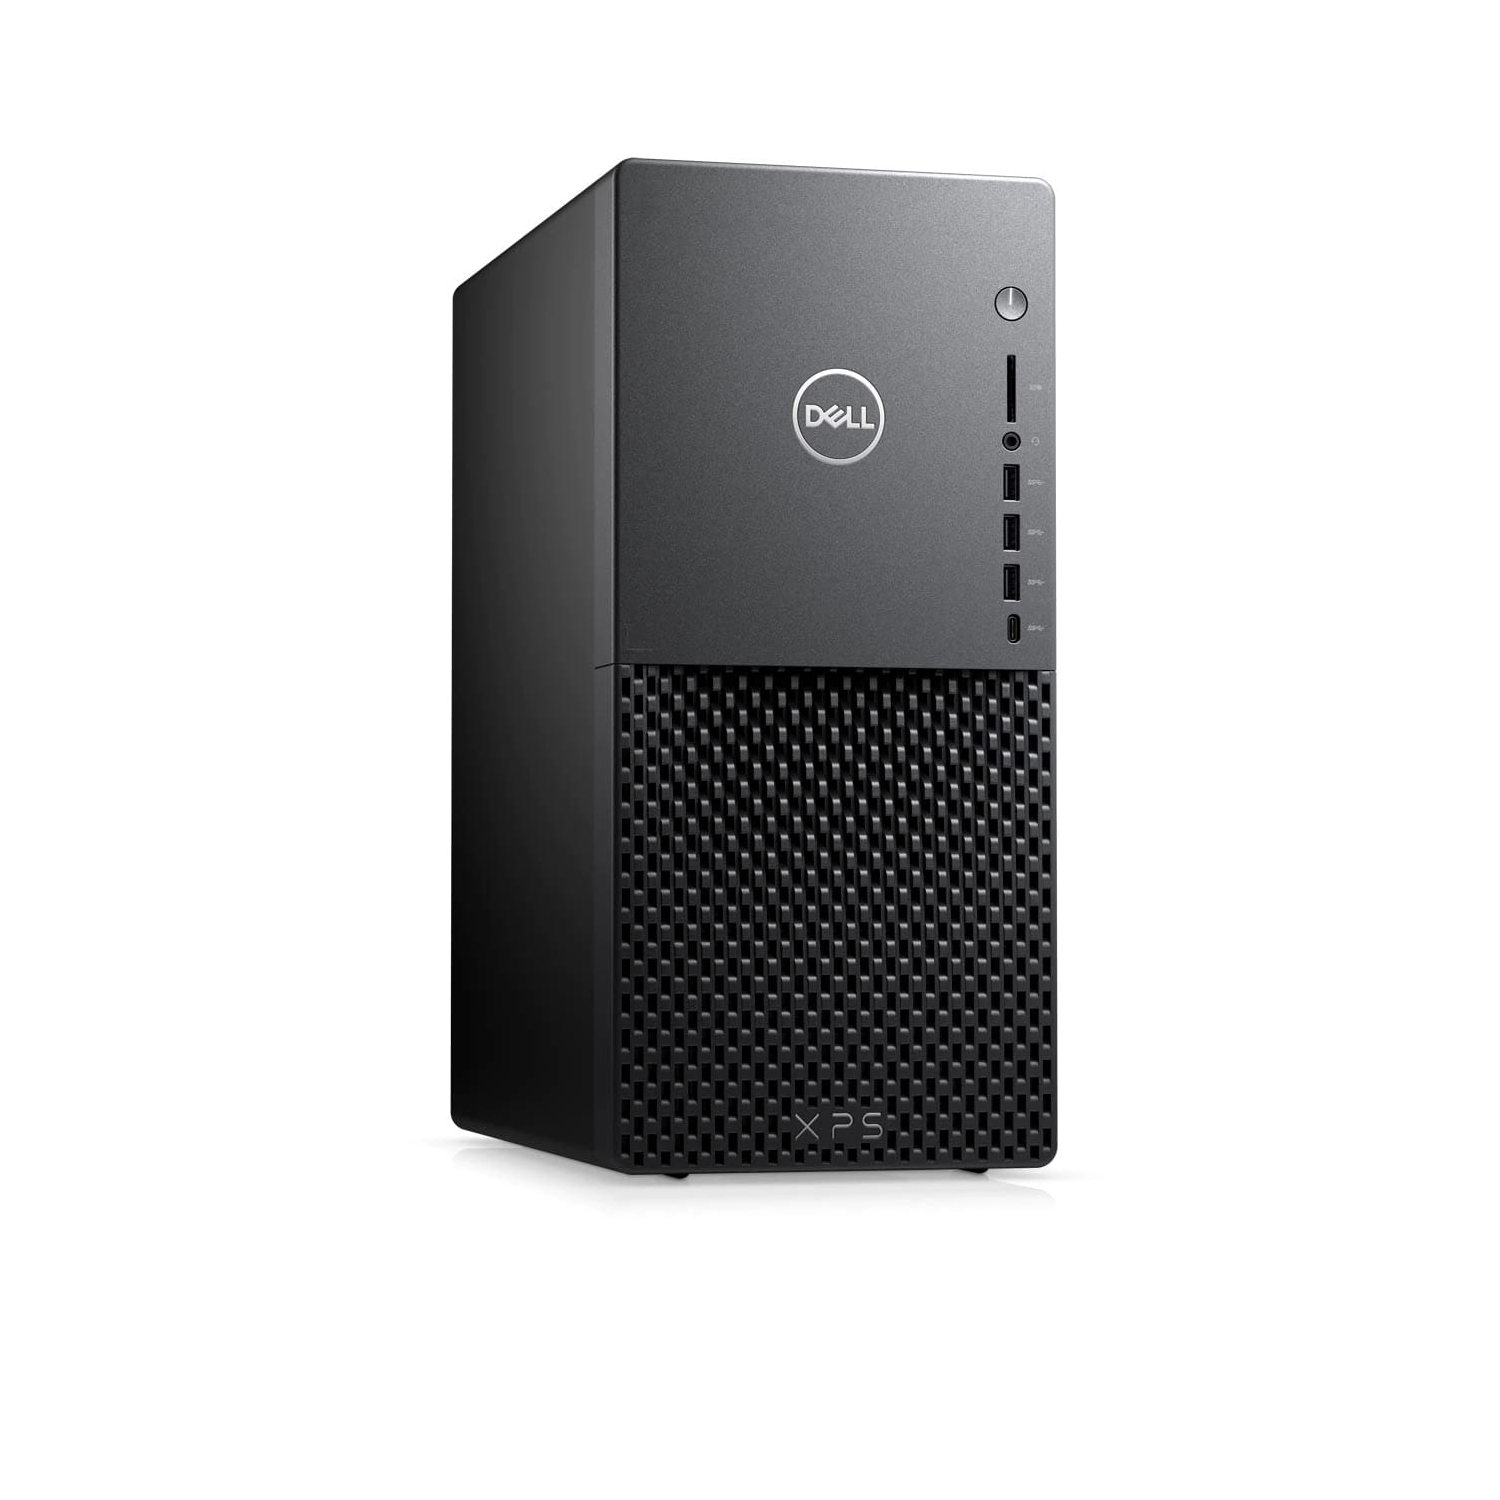 Refurbished (Excellent) - Dell XPS 8940 Desktop (2020) | Core i7 - 1TB SSD + 1TB HDD - 32GB RAM - RX 5600 | 8 Cores @ 4.9 GHz - 11th Gen CPU Certified Refurbished